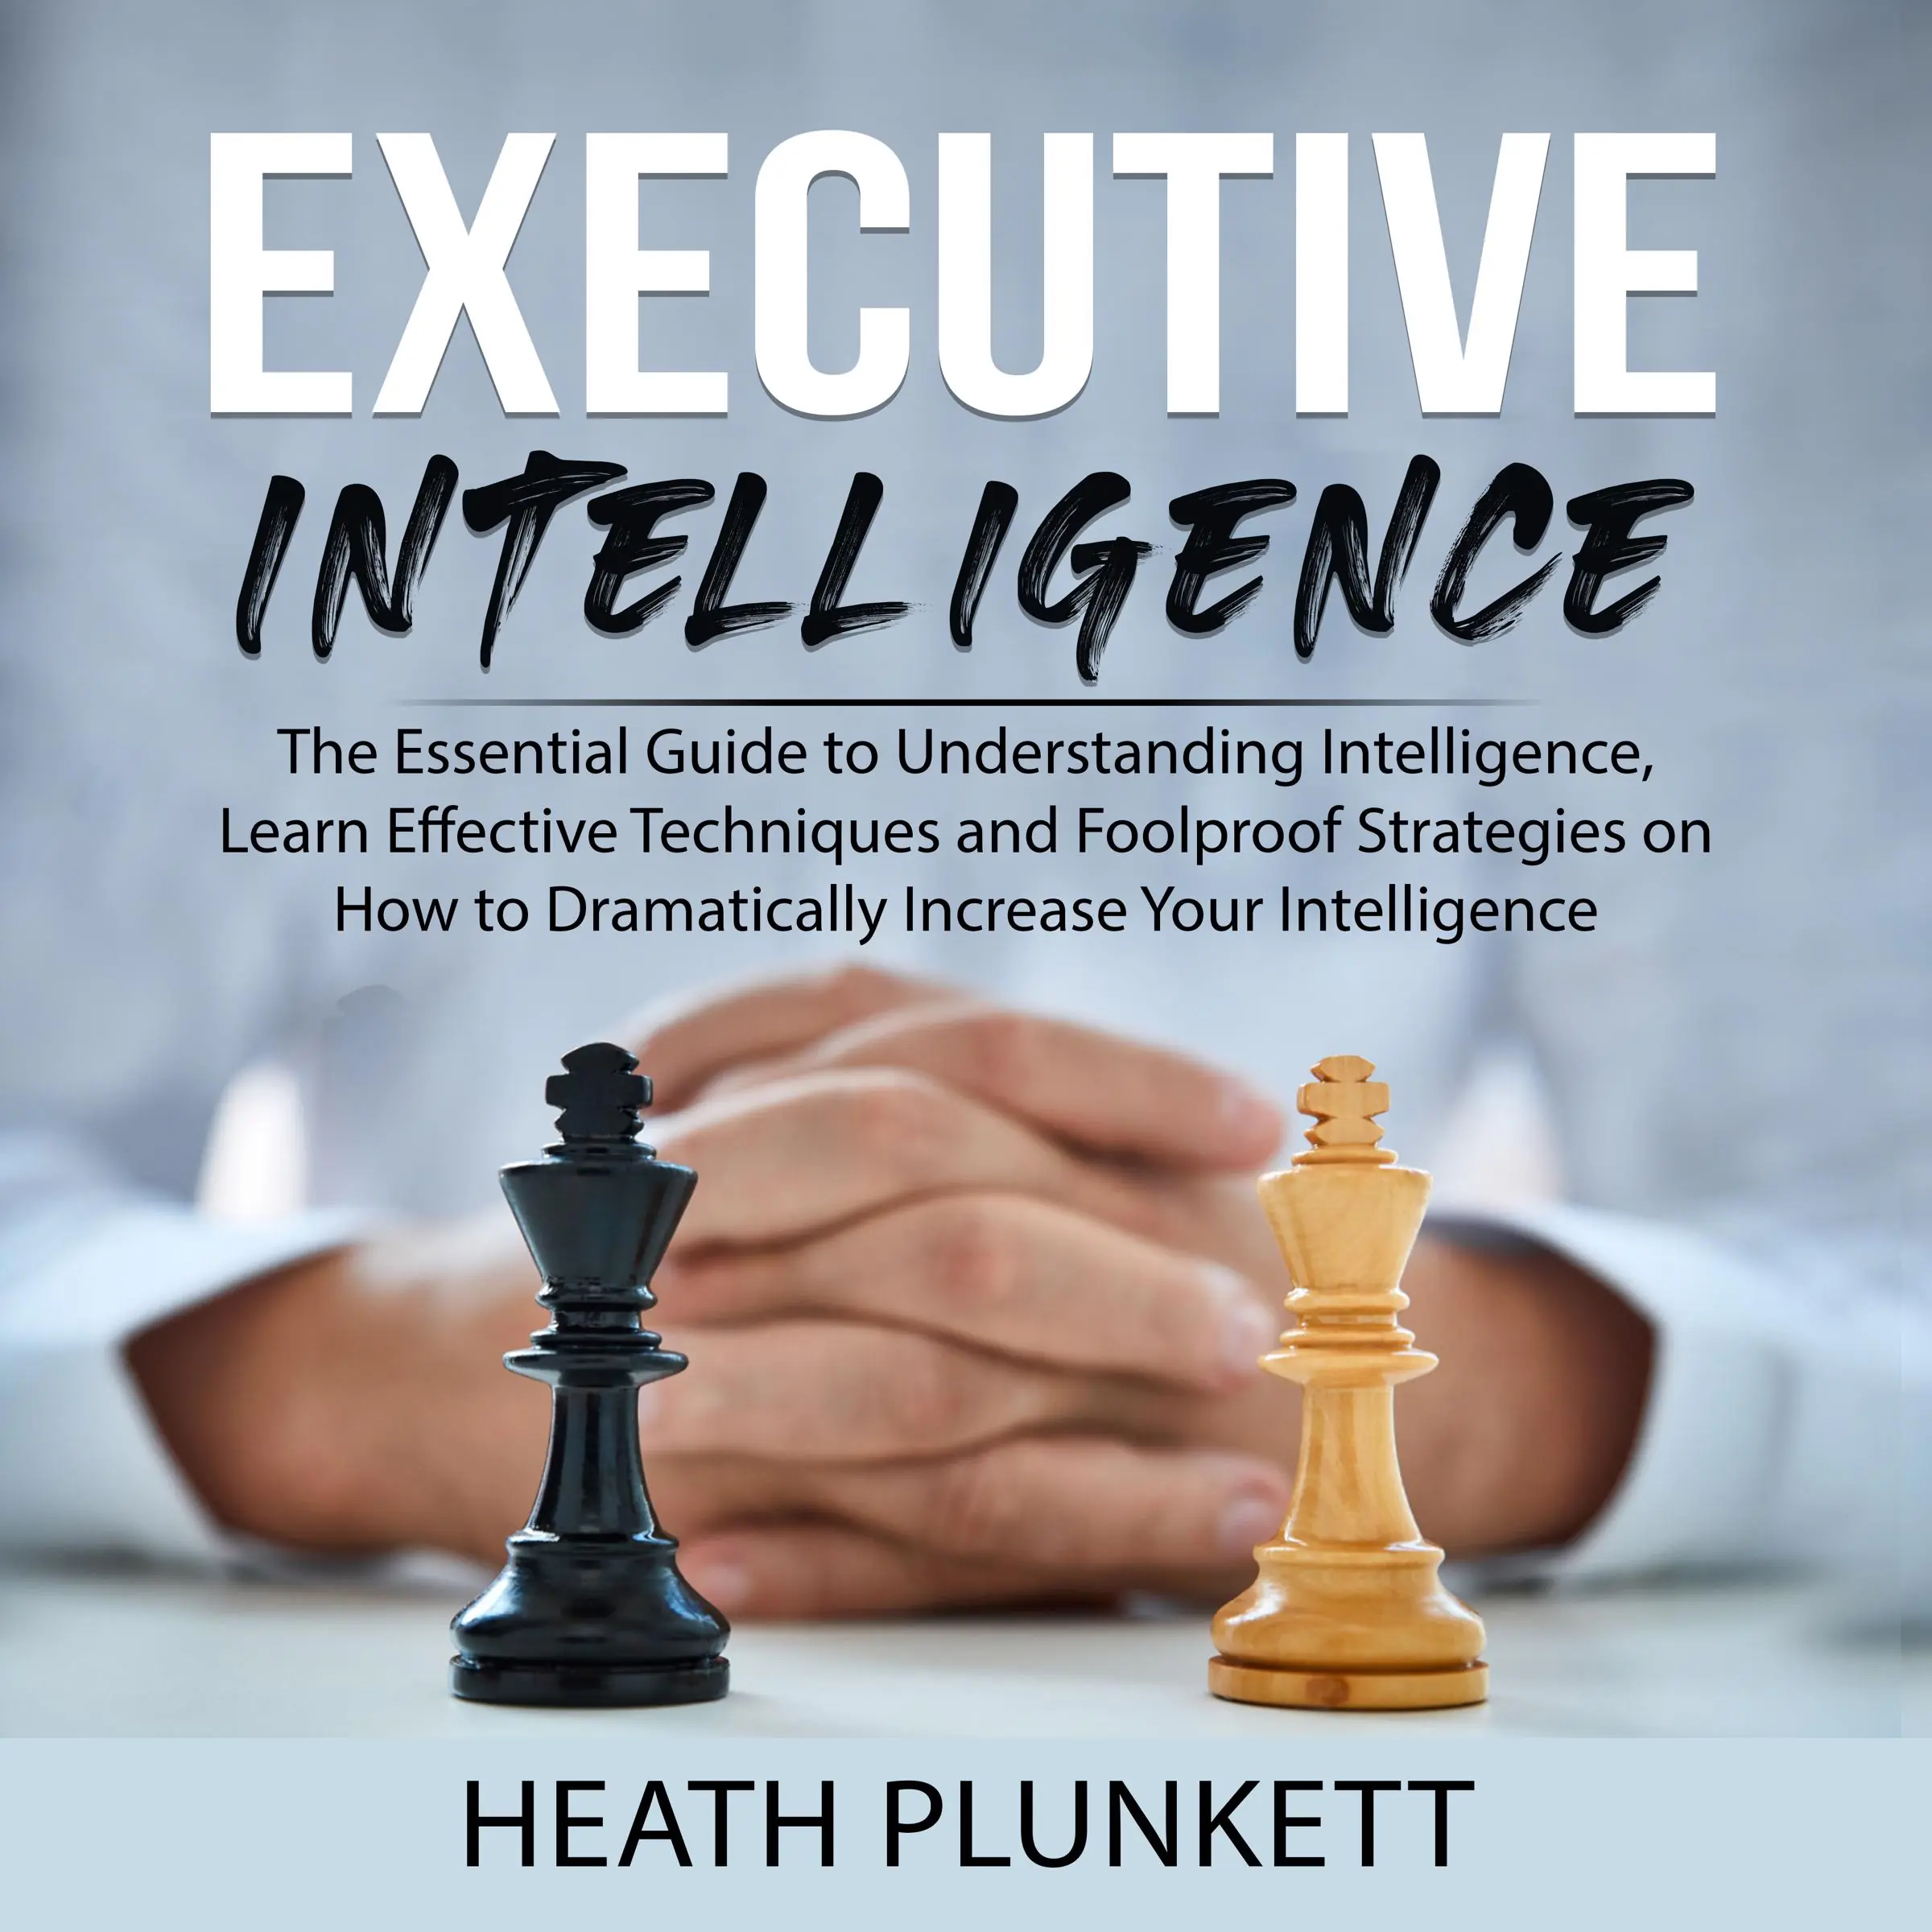 Executive Intelligence: The Essential Guide to Understanding Intelligence,  Learn Effective Techniques and Foolproof Strategies on How to Dramatically Increase Your Intelligence Audiobook by Heath Plunkett